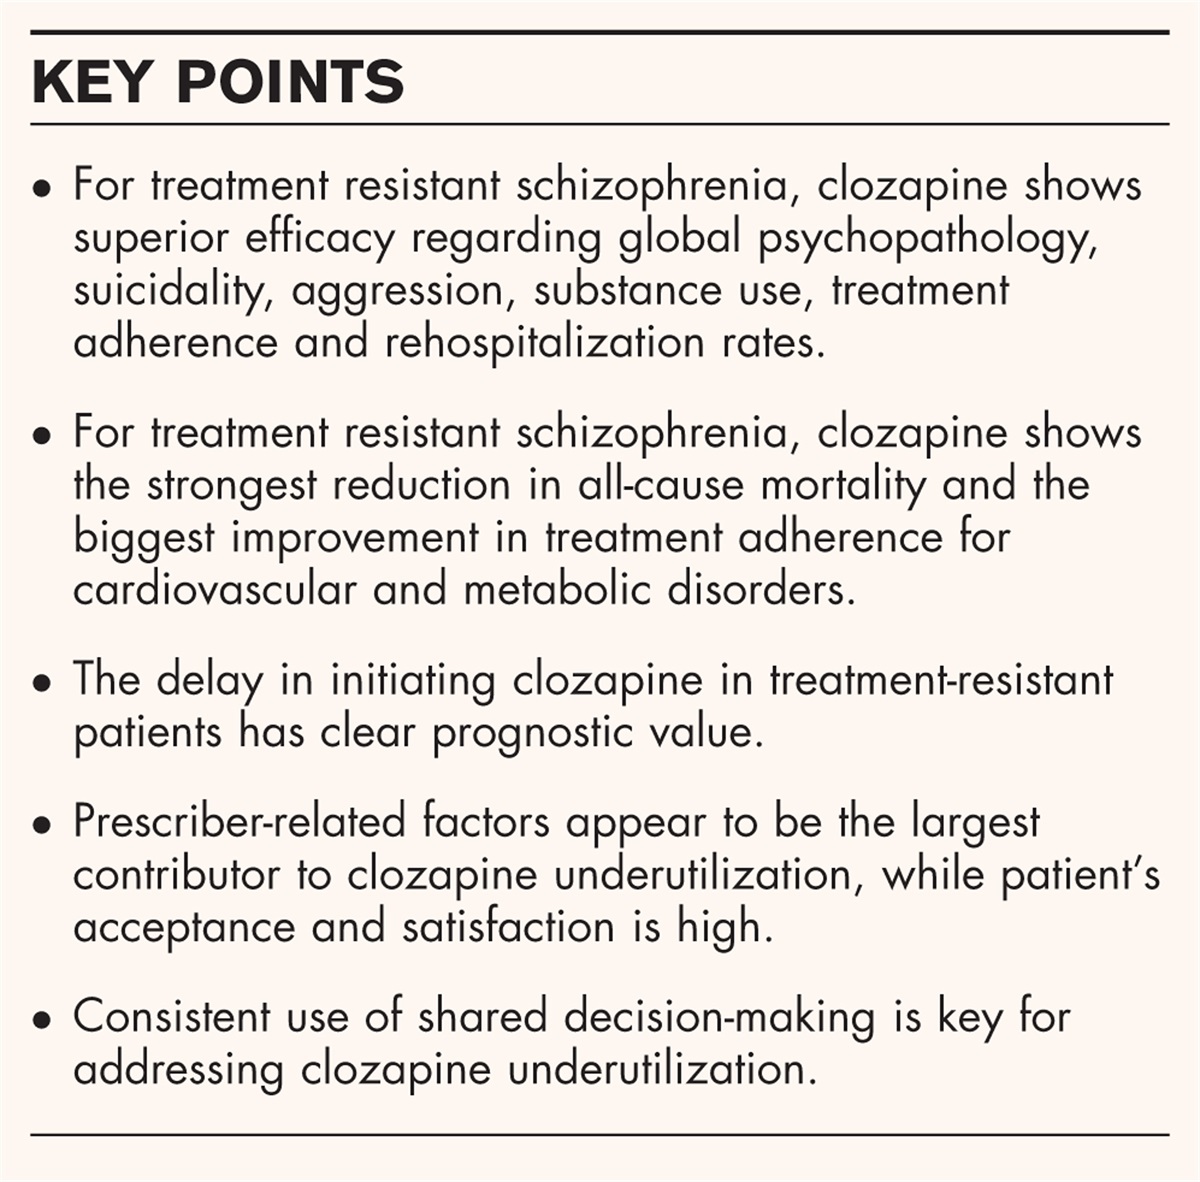 The ever-growing case for clozapine in the treatment of schizophrenia: an obligation for psychiatrists and psychiatry